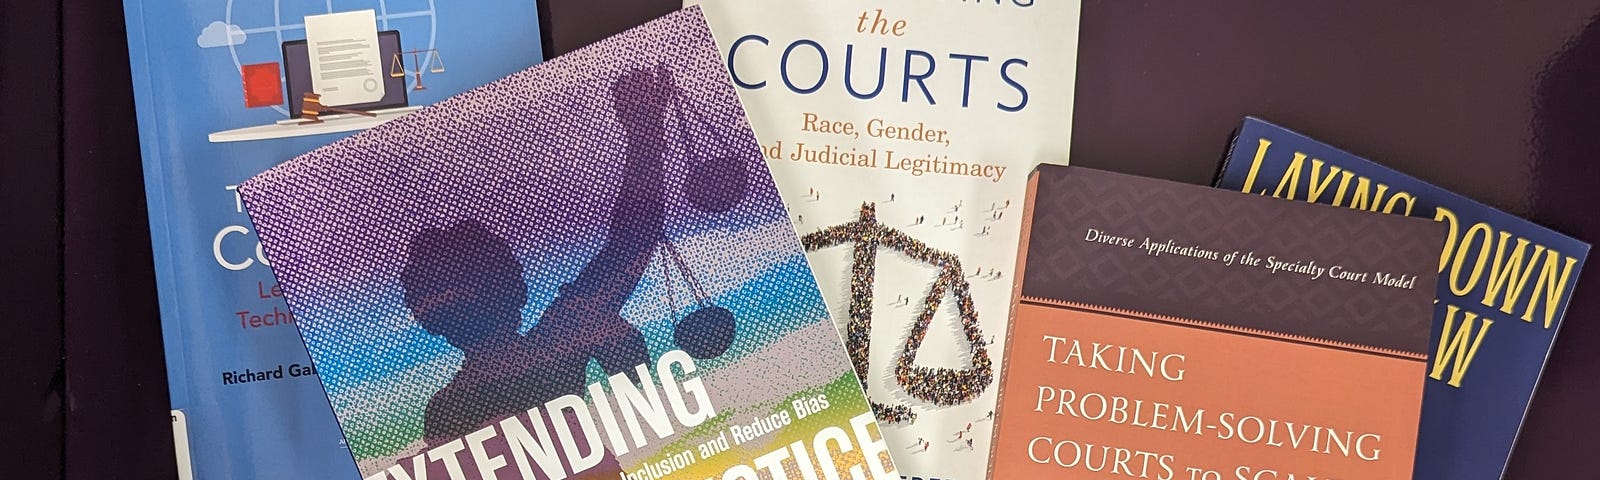 Five books are scattered over a dark purple background. One book has the title “Extending Justice” and the image on the cover is a silhouette of Lady Justice holding scales up with her left arm. There are multicolored stripes superimposed over the cover image. Another book has the title “Take Problem-Solving Courts to Scale.” It, too, has a photo of Lady Justice on the cover with books blurred in the background. The book title is printed in white text on a rust colored banner.